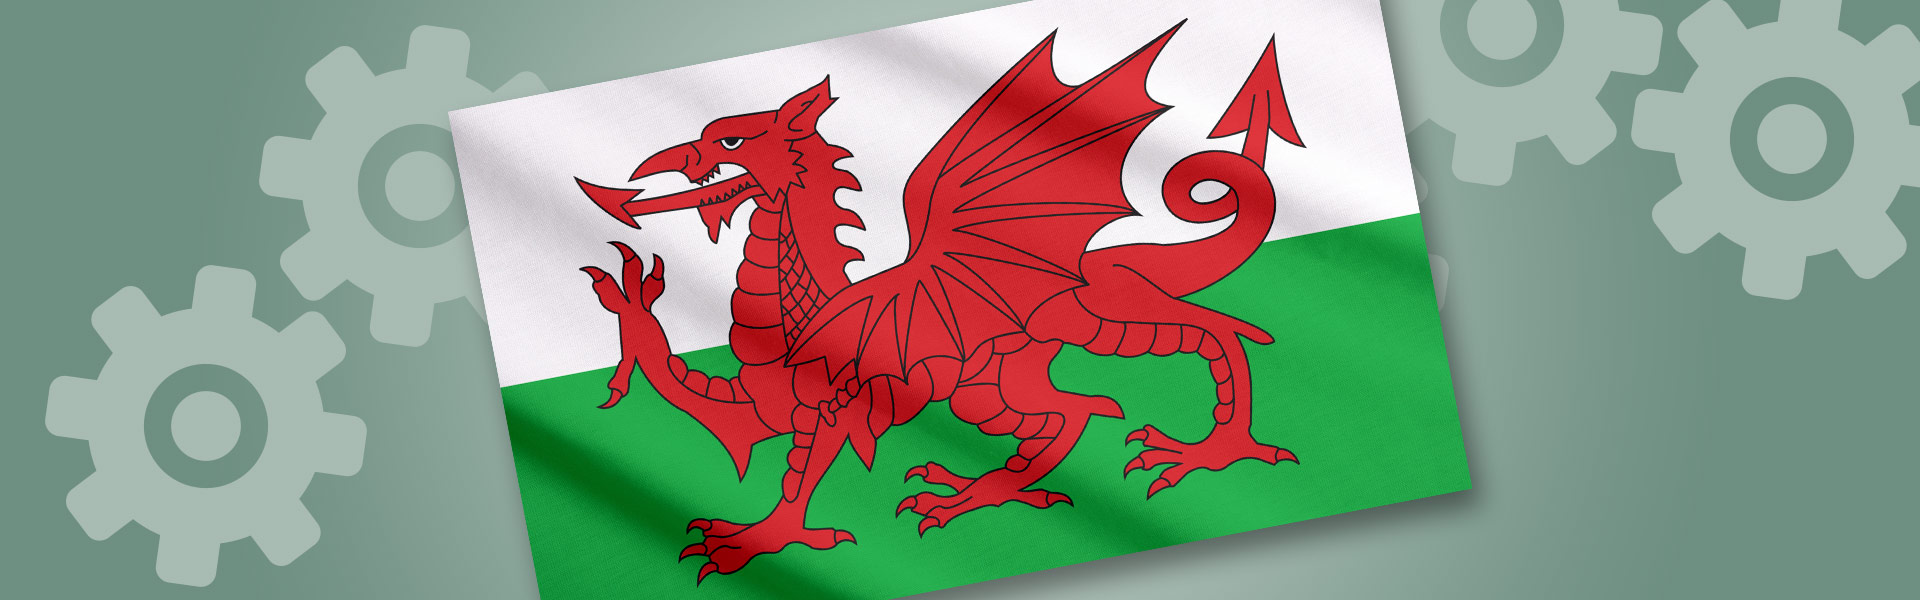 Welsh Manufacturing: In Focus